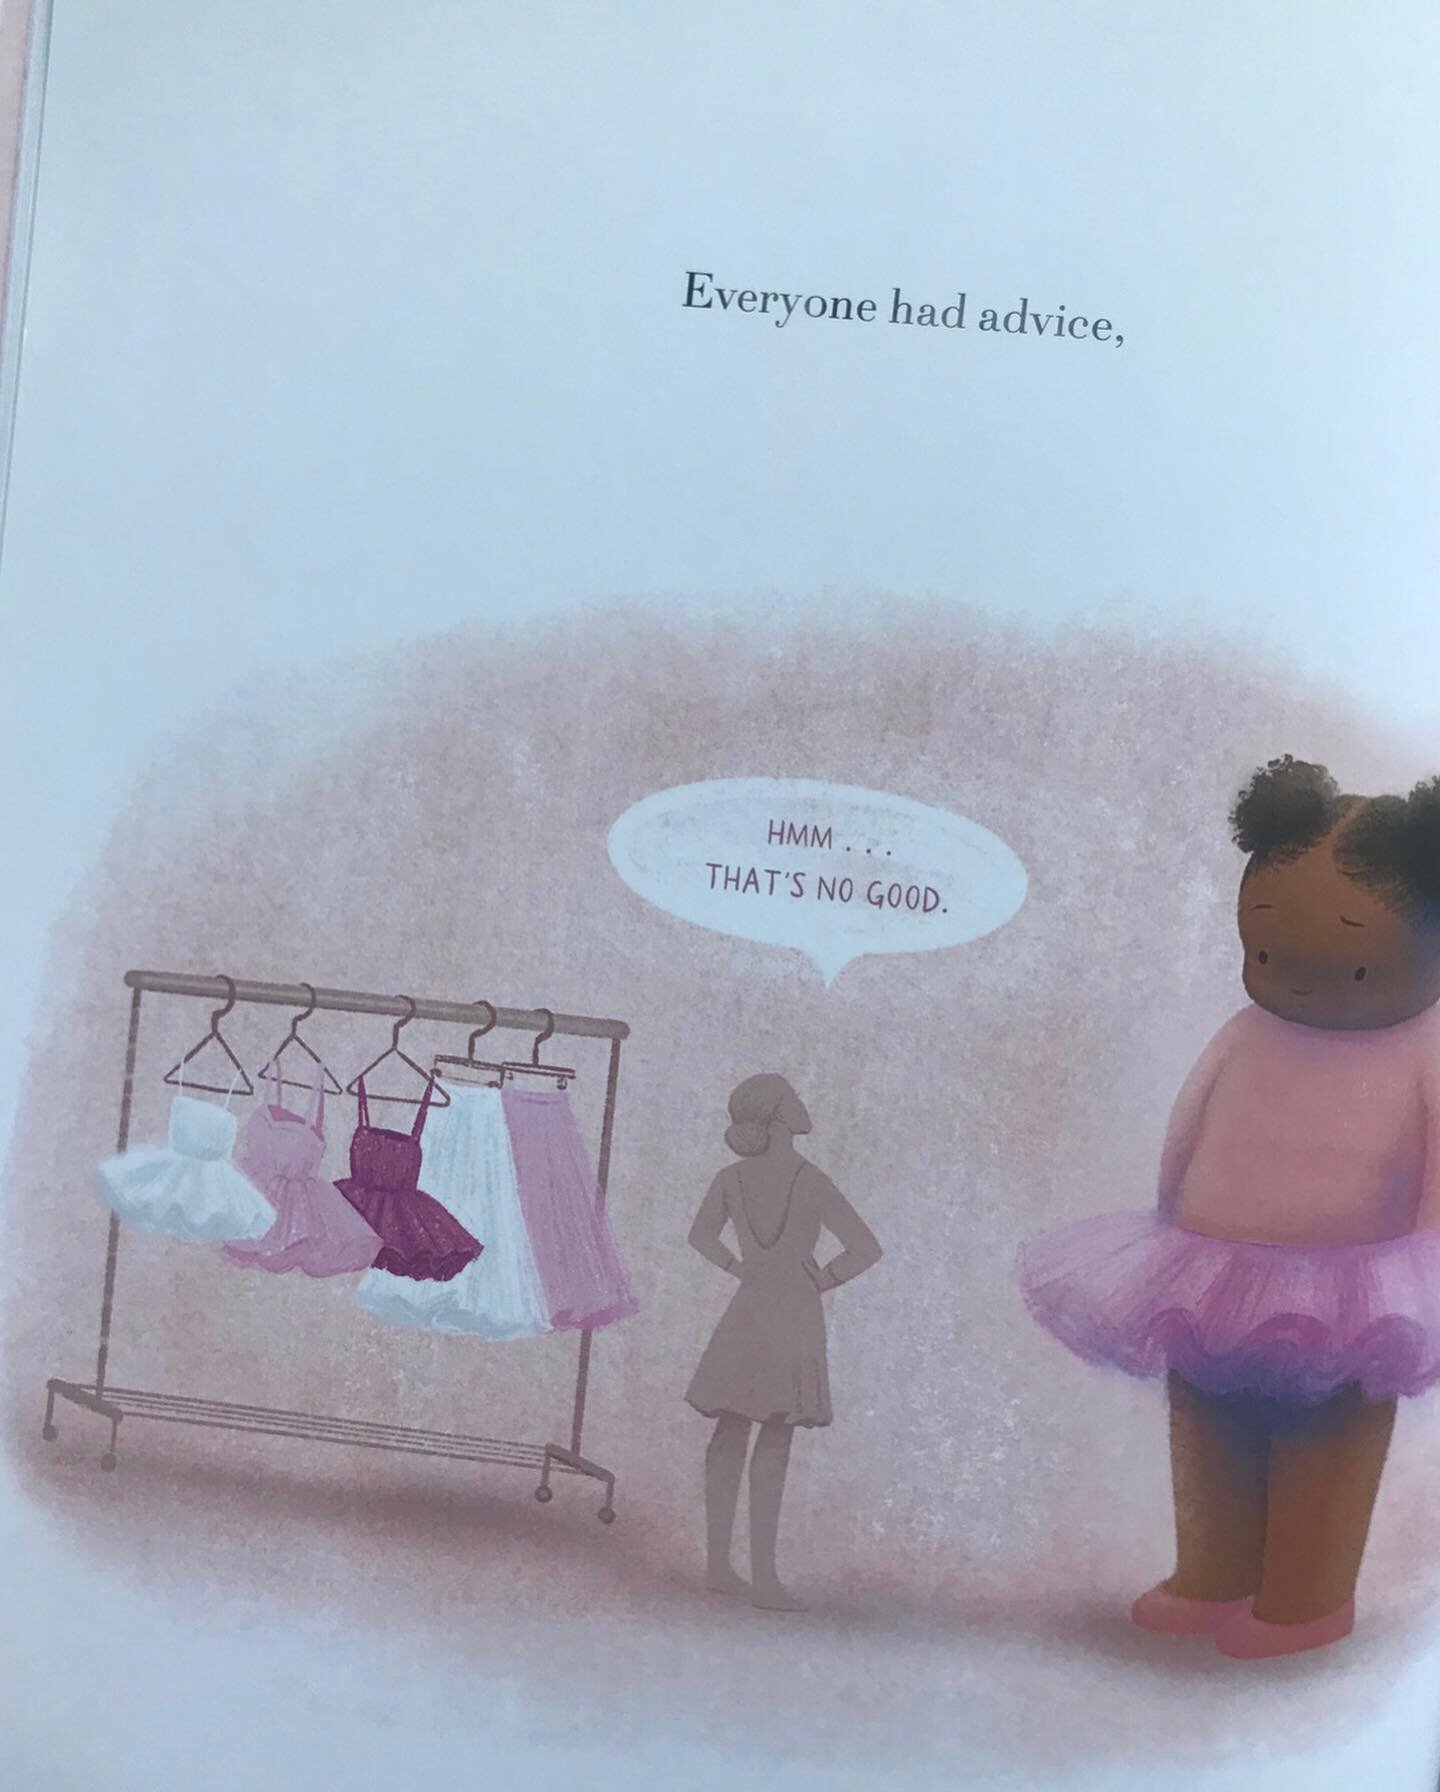 CAPTION THIS&hellip;
👀
Found the book BIG by @vashtiharrison last weekend and love it so much I wanted to share it here and start a conversation about how we speak, respond, and treat dancers outside the &ldquo;typical&rdquo; ballerina body image.
?